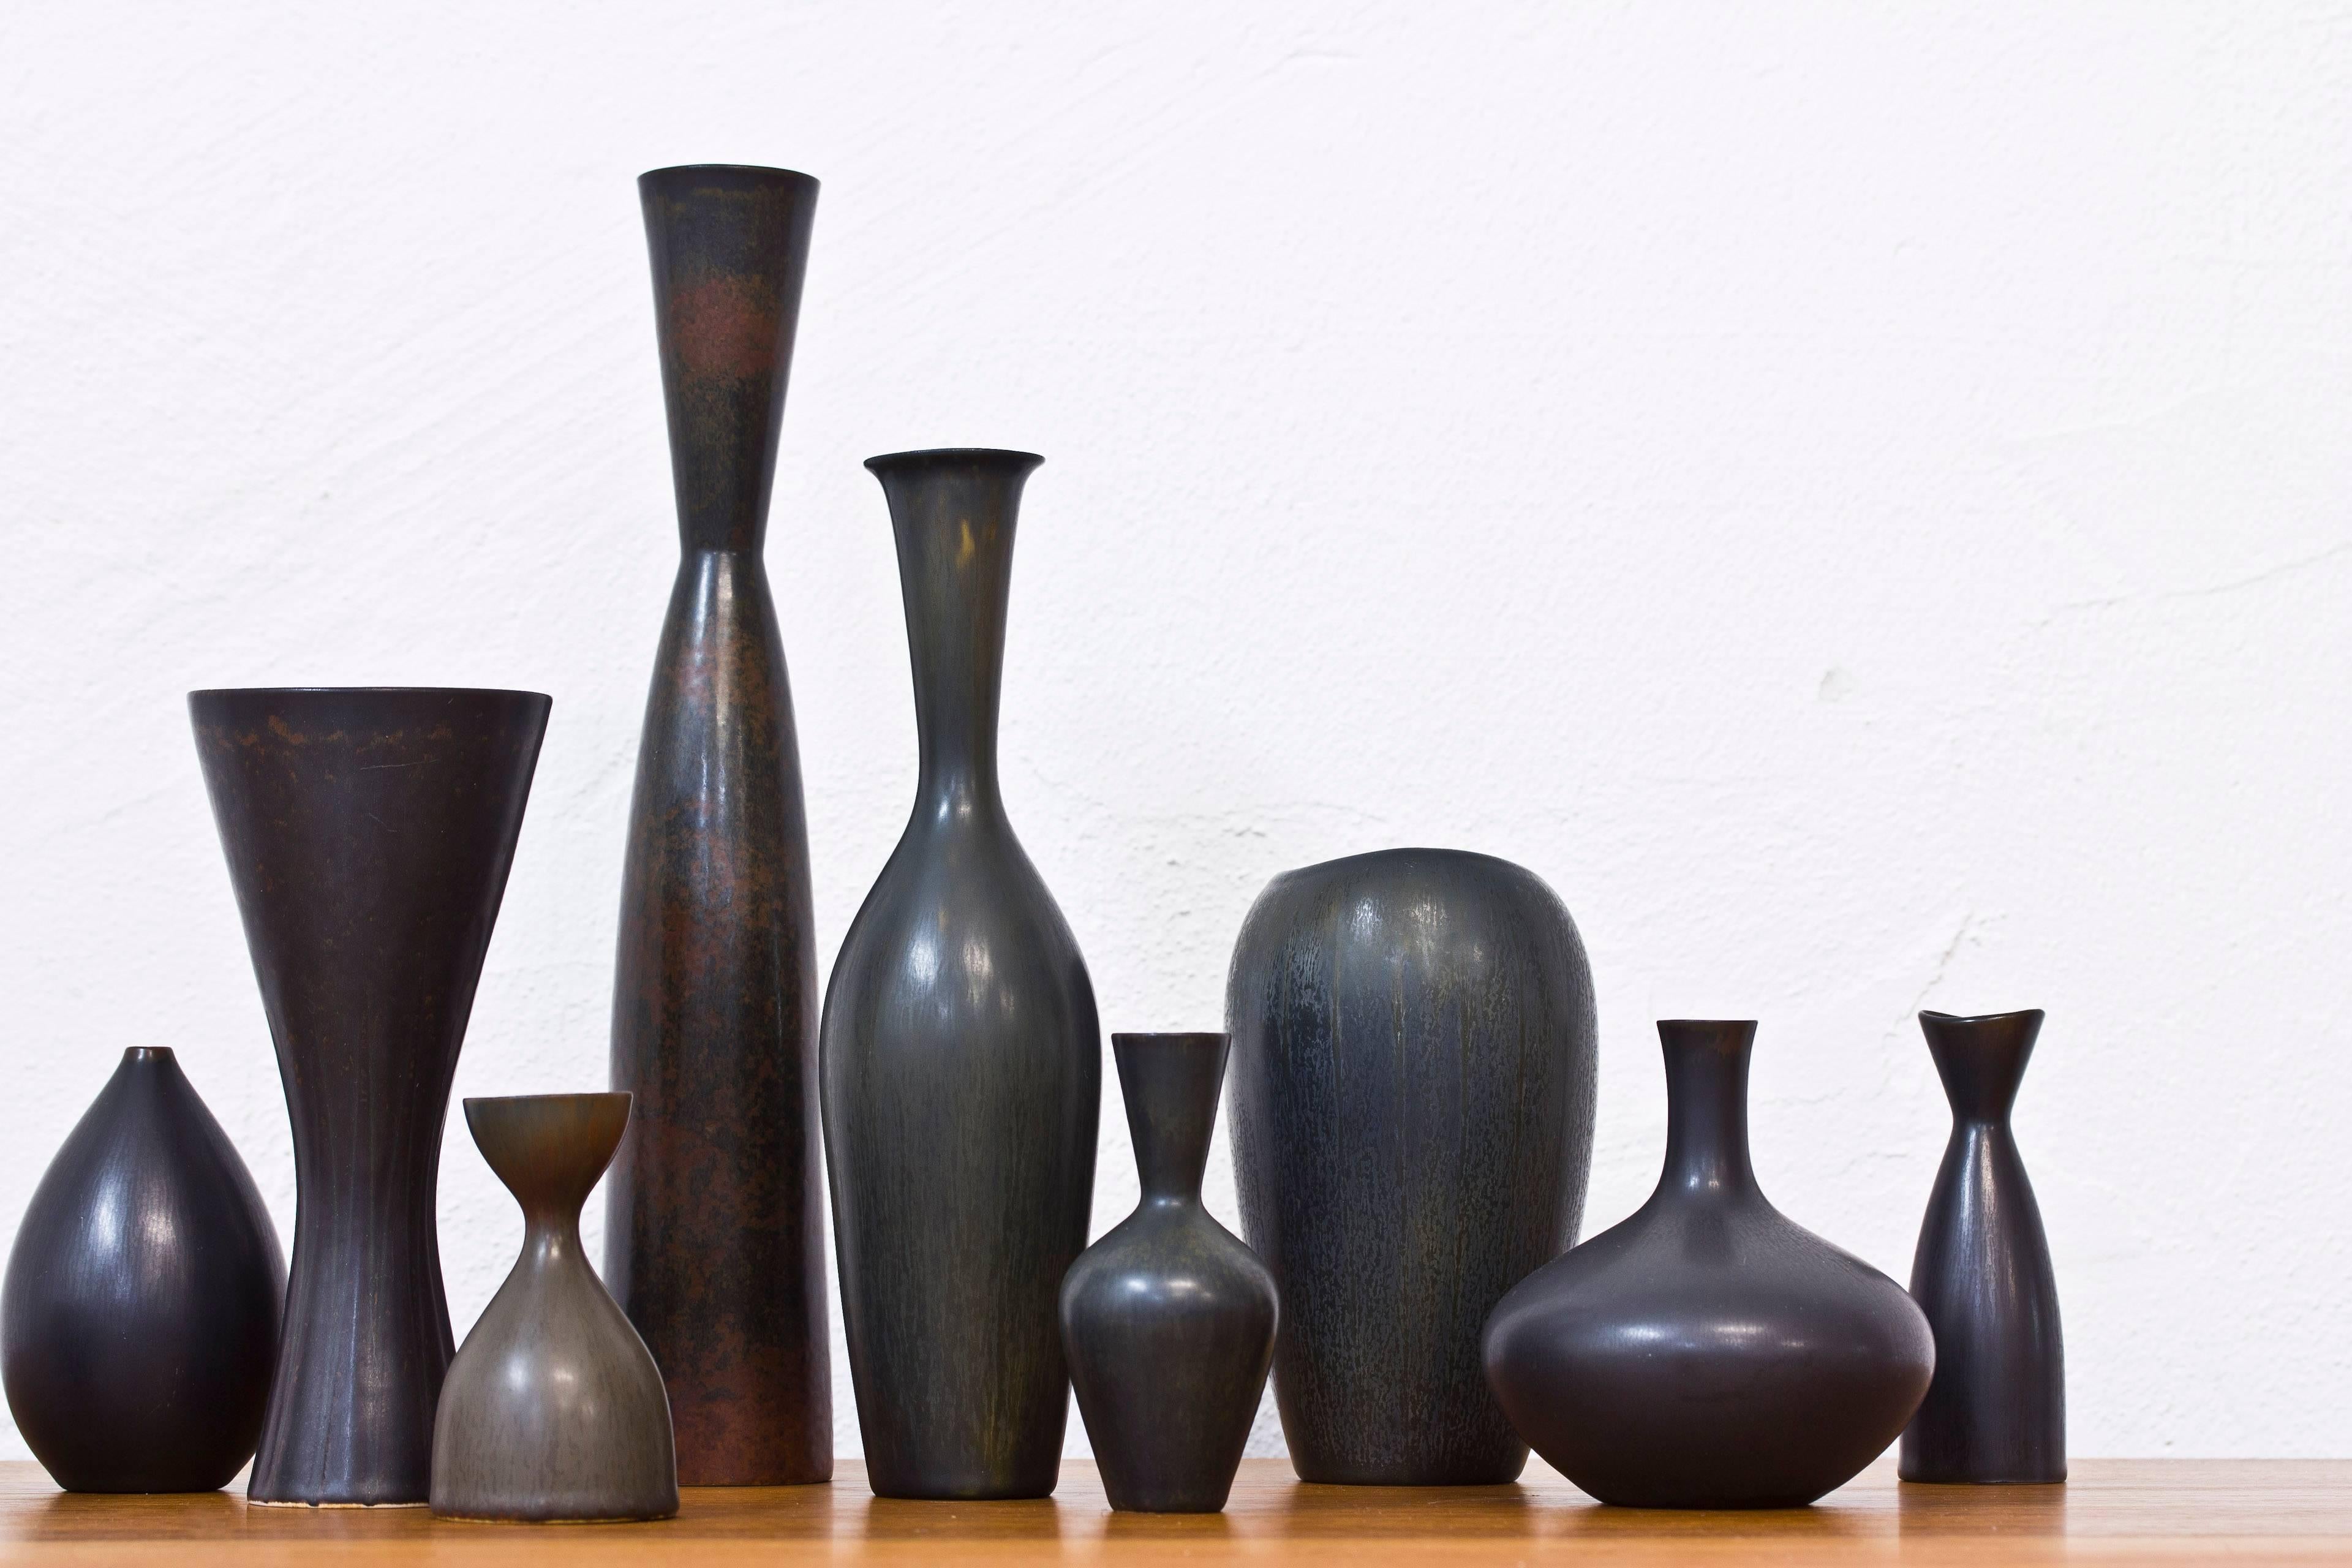 Collection of ten stoneware vases designed by Carl Harry Stalhane and Gunnar Nylund. Hand made at Rorstrand in Sweden during the 1950s-1960s. Shifting black glazes some with relief patterns. The ten vases are sold together as a collection. All